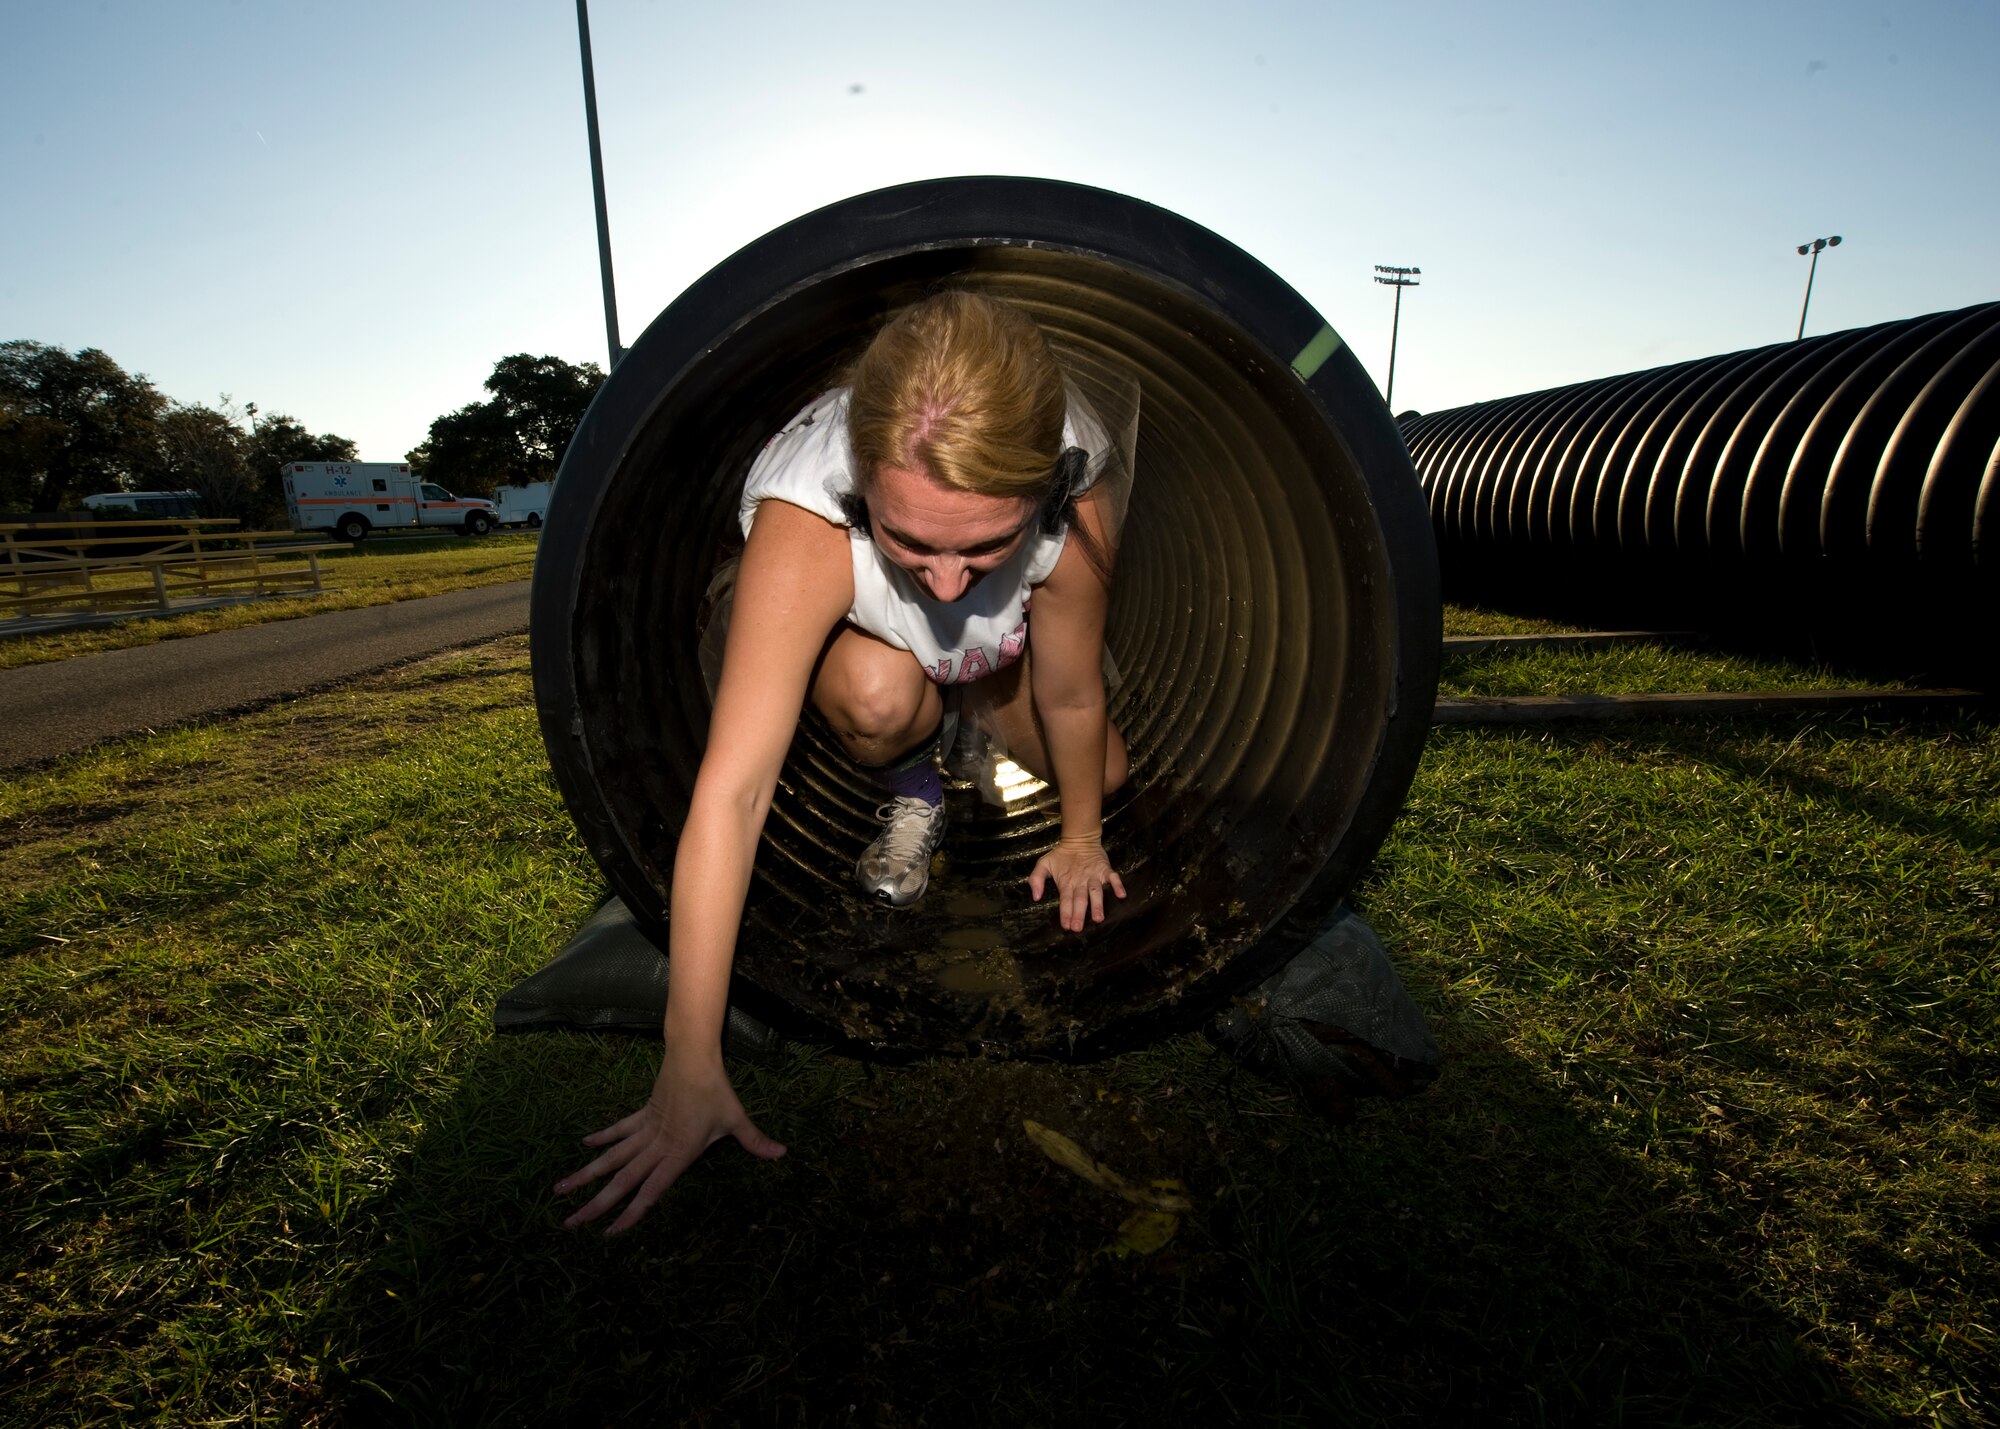 U.S. Air Force Master Sergeant Sonia Poulin, first sergeant of  1st Special Operations Comptroller Squadron, crawls through a tube filled with rotten food during the Carnivore Confidence Course at Hurlburt Field, Fla., Oct. 19, 2012. MSgt. Poulin is in one of many teams participating in the morale building exercise. (U.S. Air Force Photo/ Airman 1st Class Nigel Sandridge)